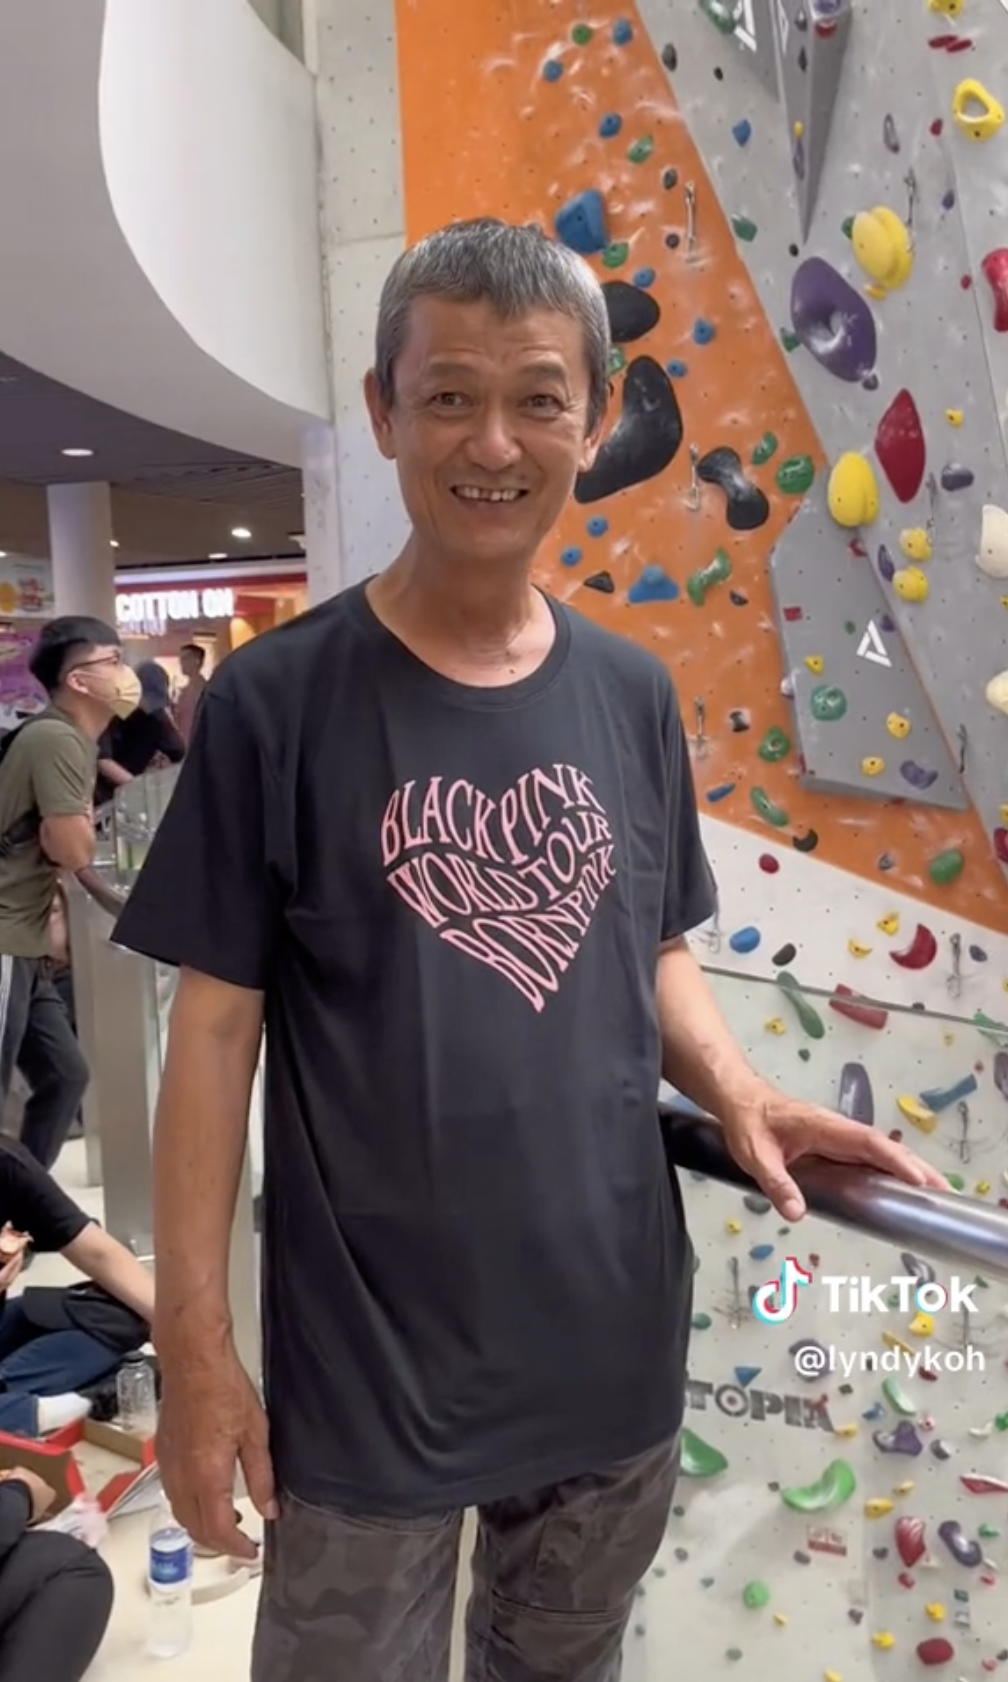 60-Year-Old Dad Attends His First Blackpink Concert in Singapore